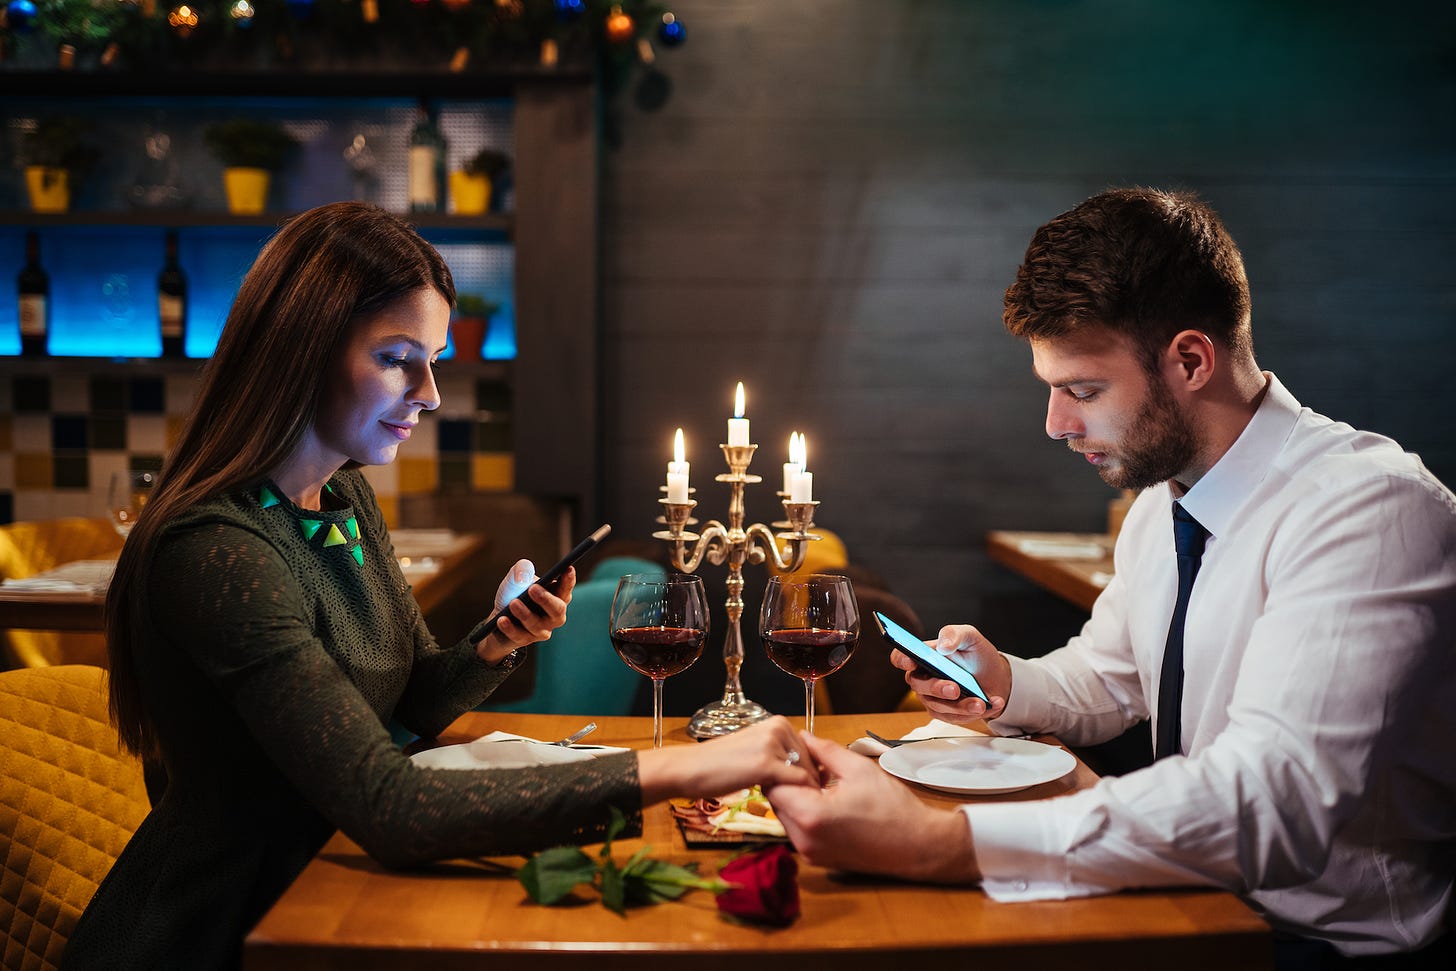 Image of couple looking at phones while dining